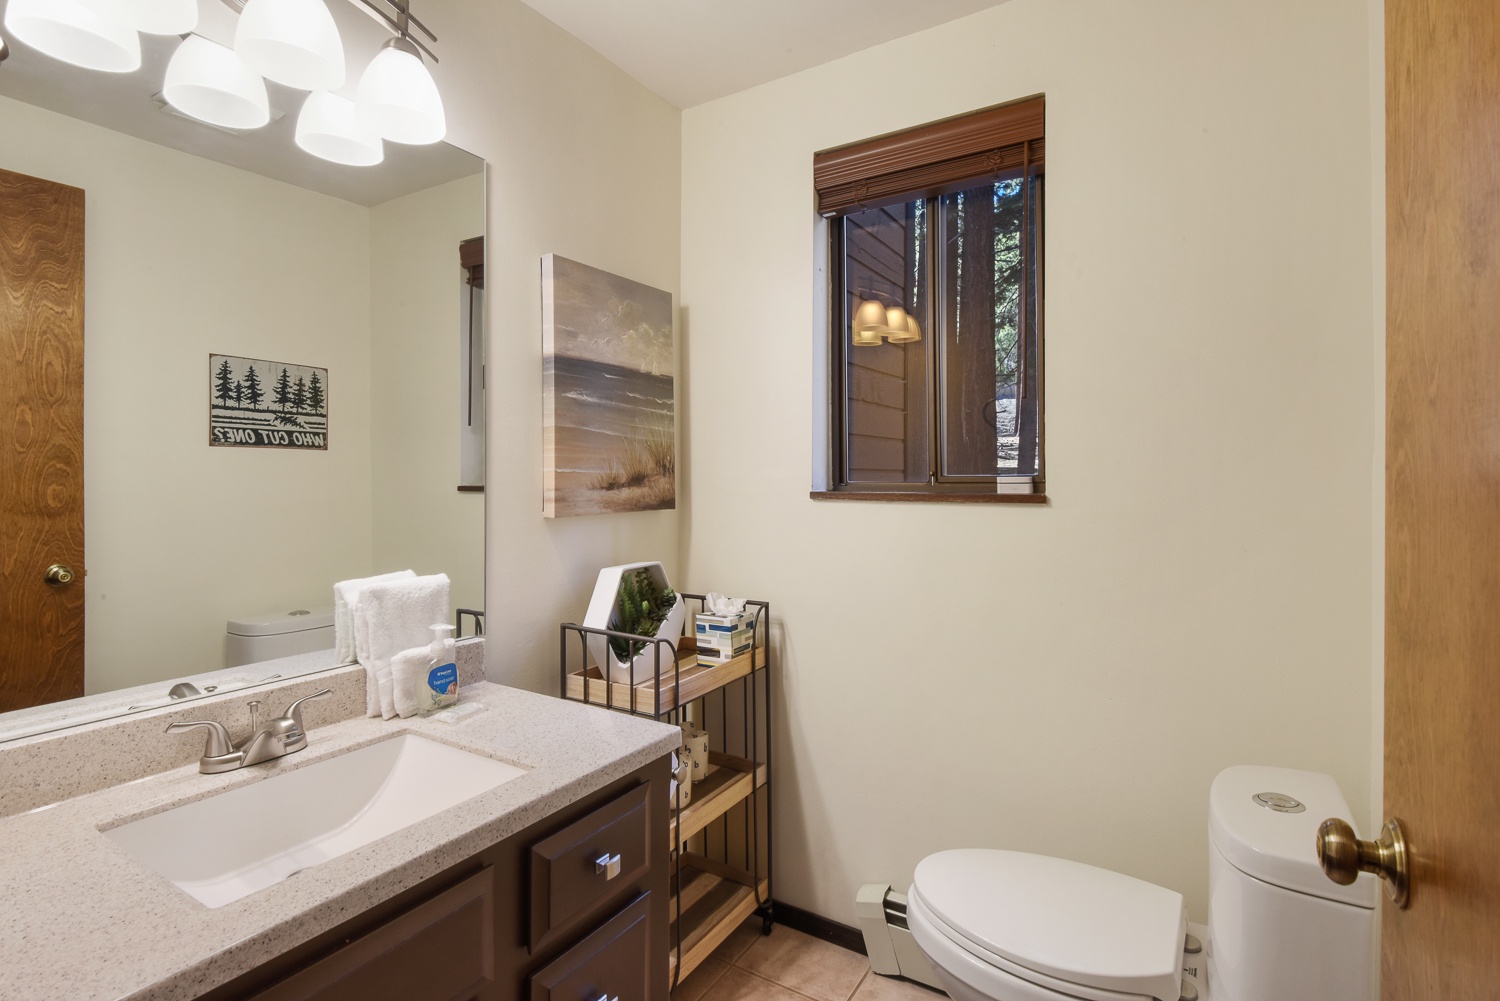 Unit #2: A convenient half bathroom is tucked away off the dining area